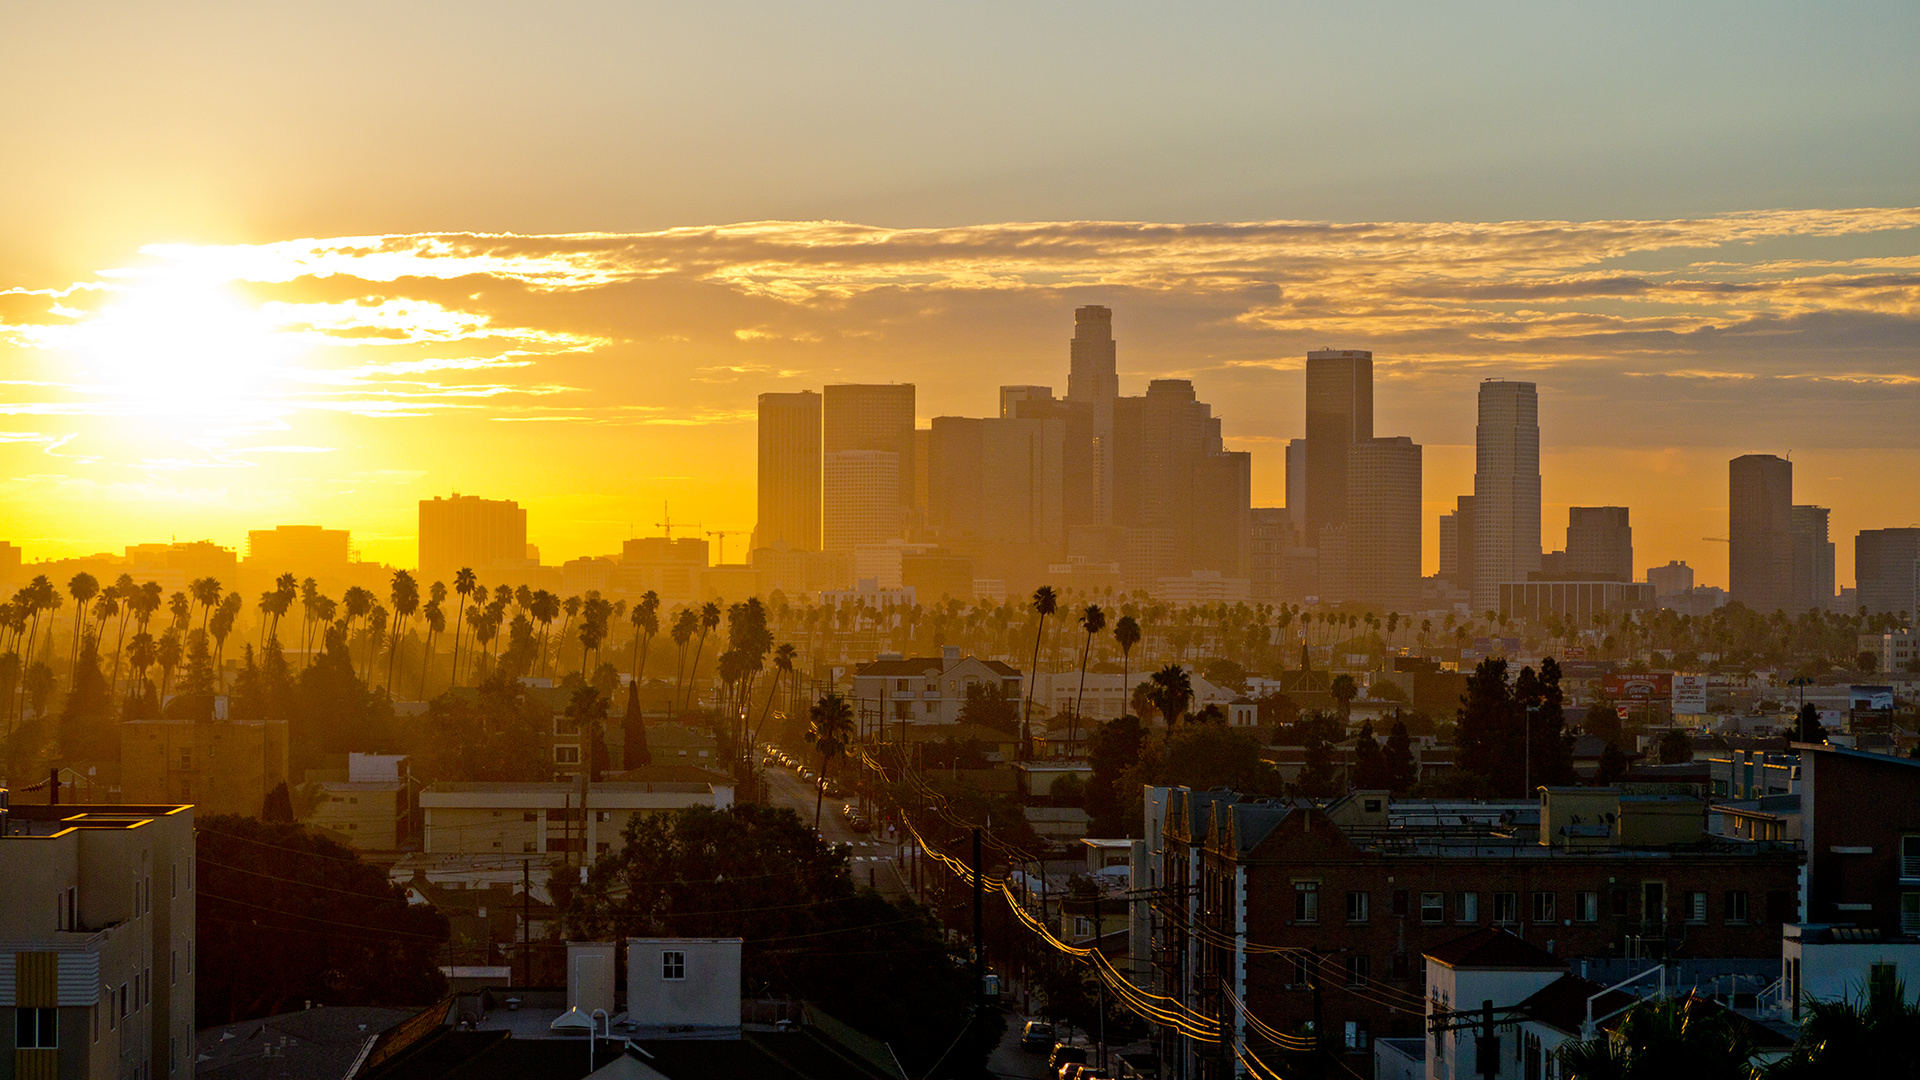 Hollywood Skyline, Los Angeles wallpapers, 3D city images, Movie capital, 1920x1080 Full HD Desktop